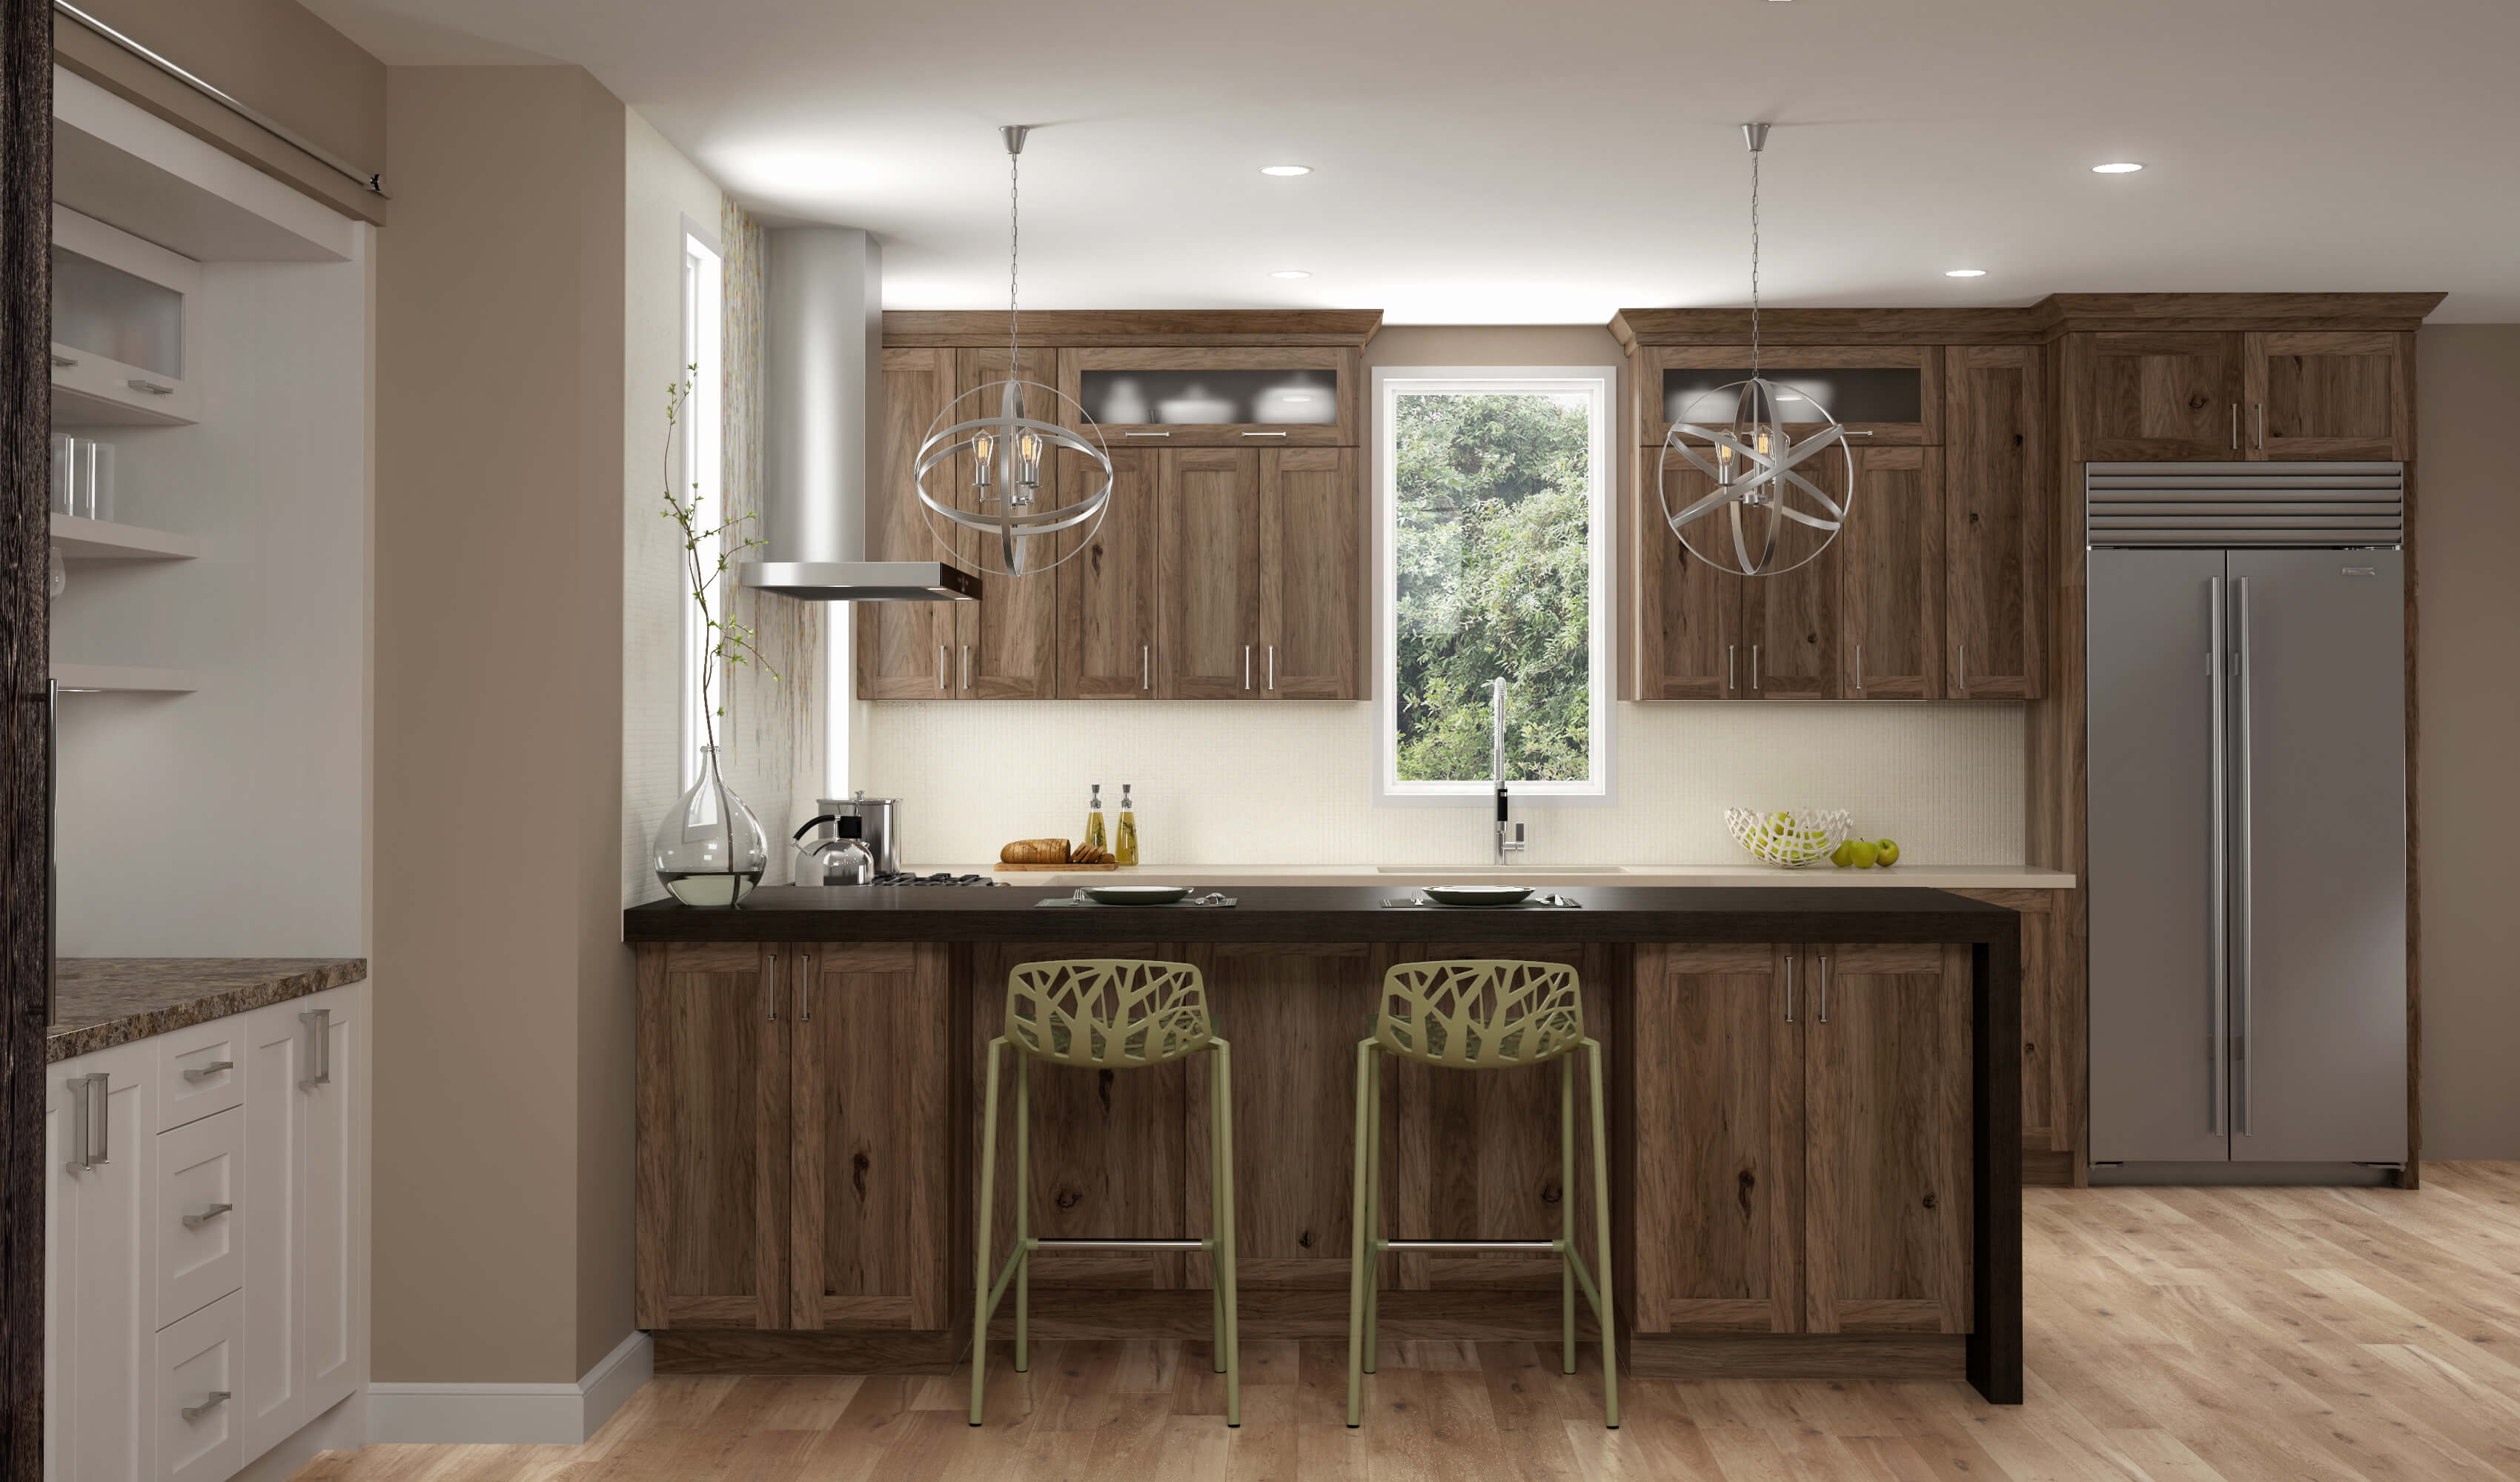 Modern Twist on Hickory Cabinetry in a finished Kitchen Remodel- Gray stained cabinets with beautiful wood grain.